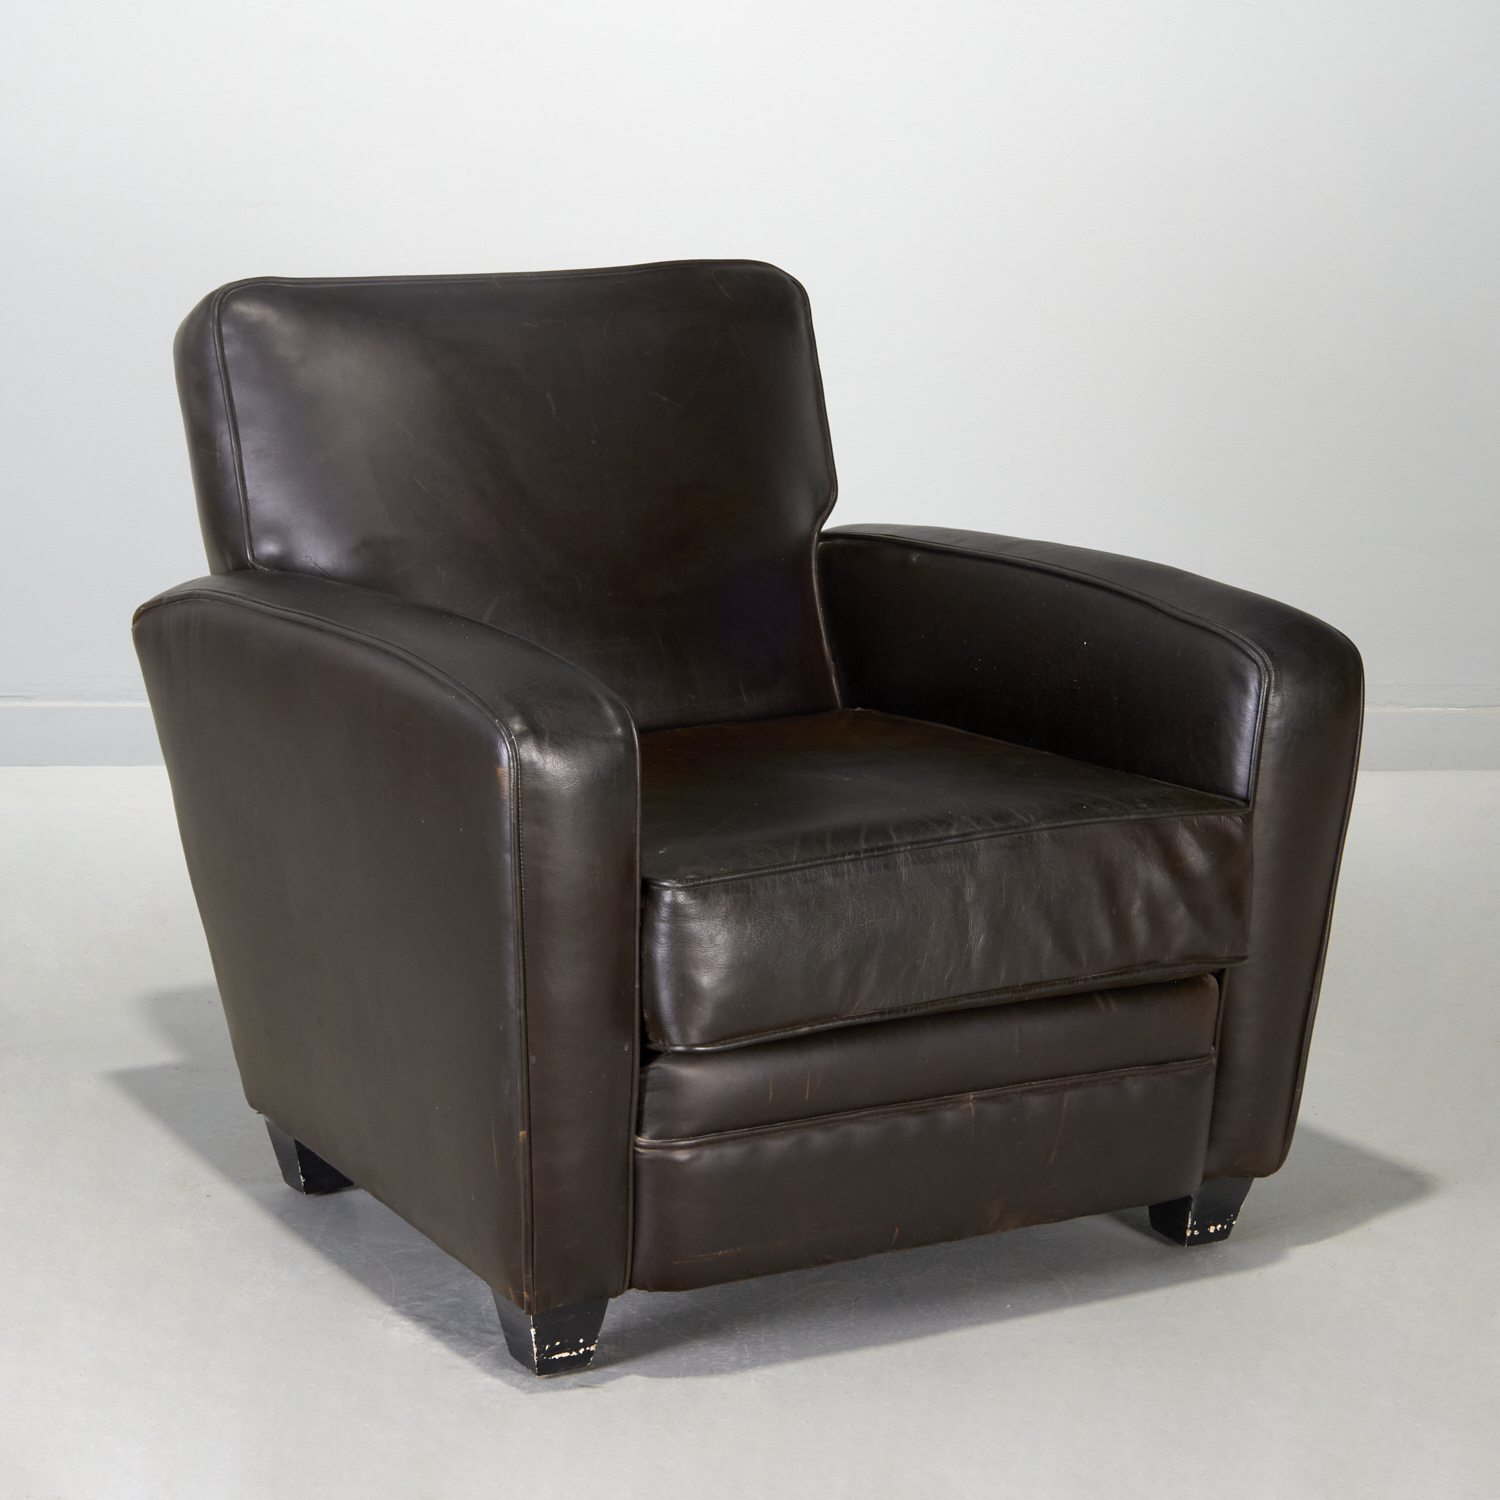 ART DECO STYLE LEATHER UPHOLSTERED 3608dd